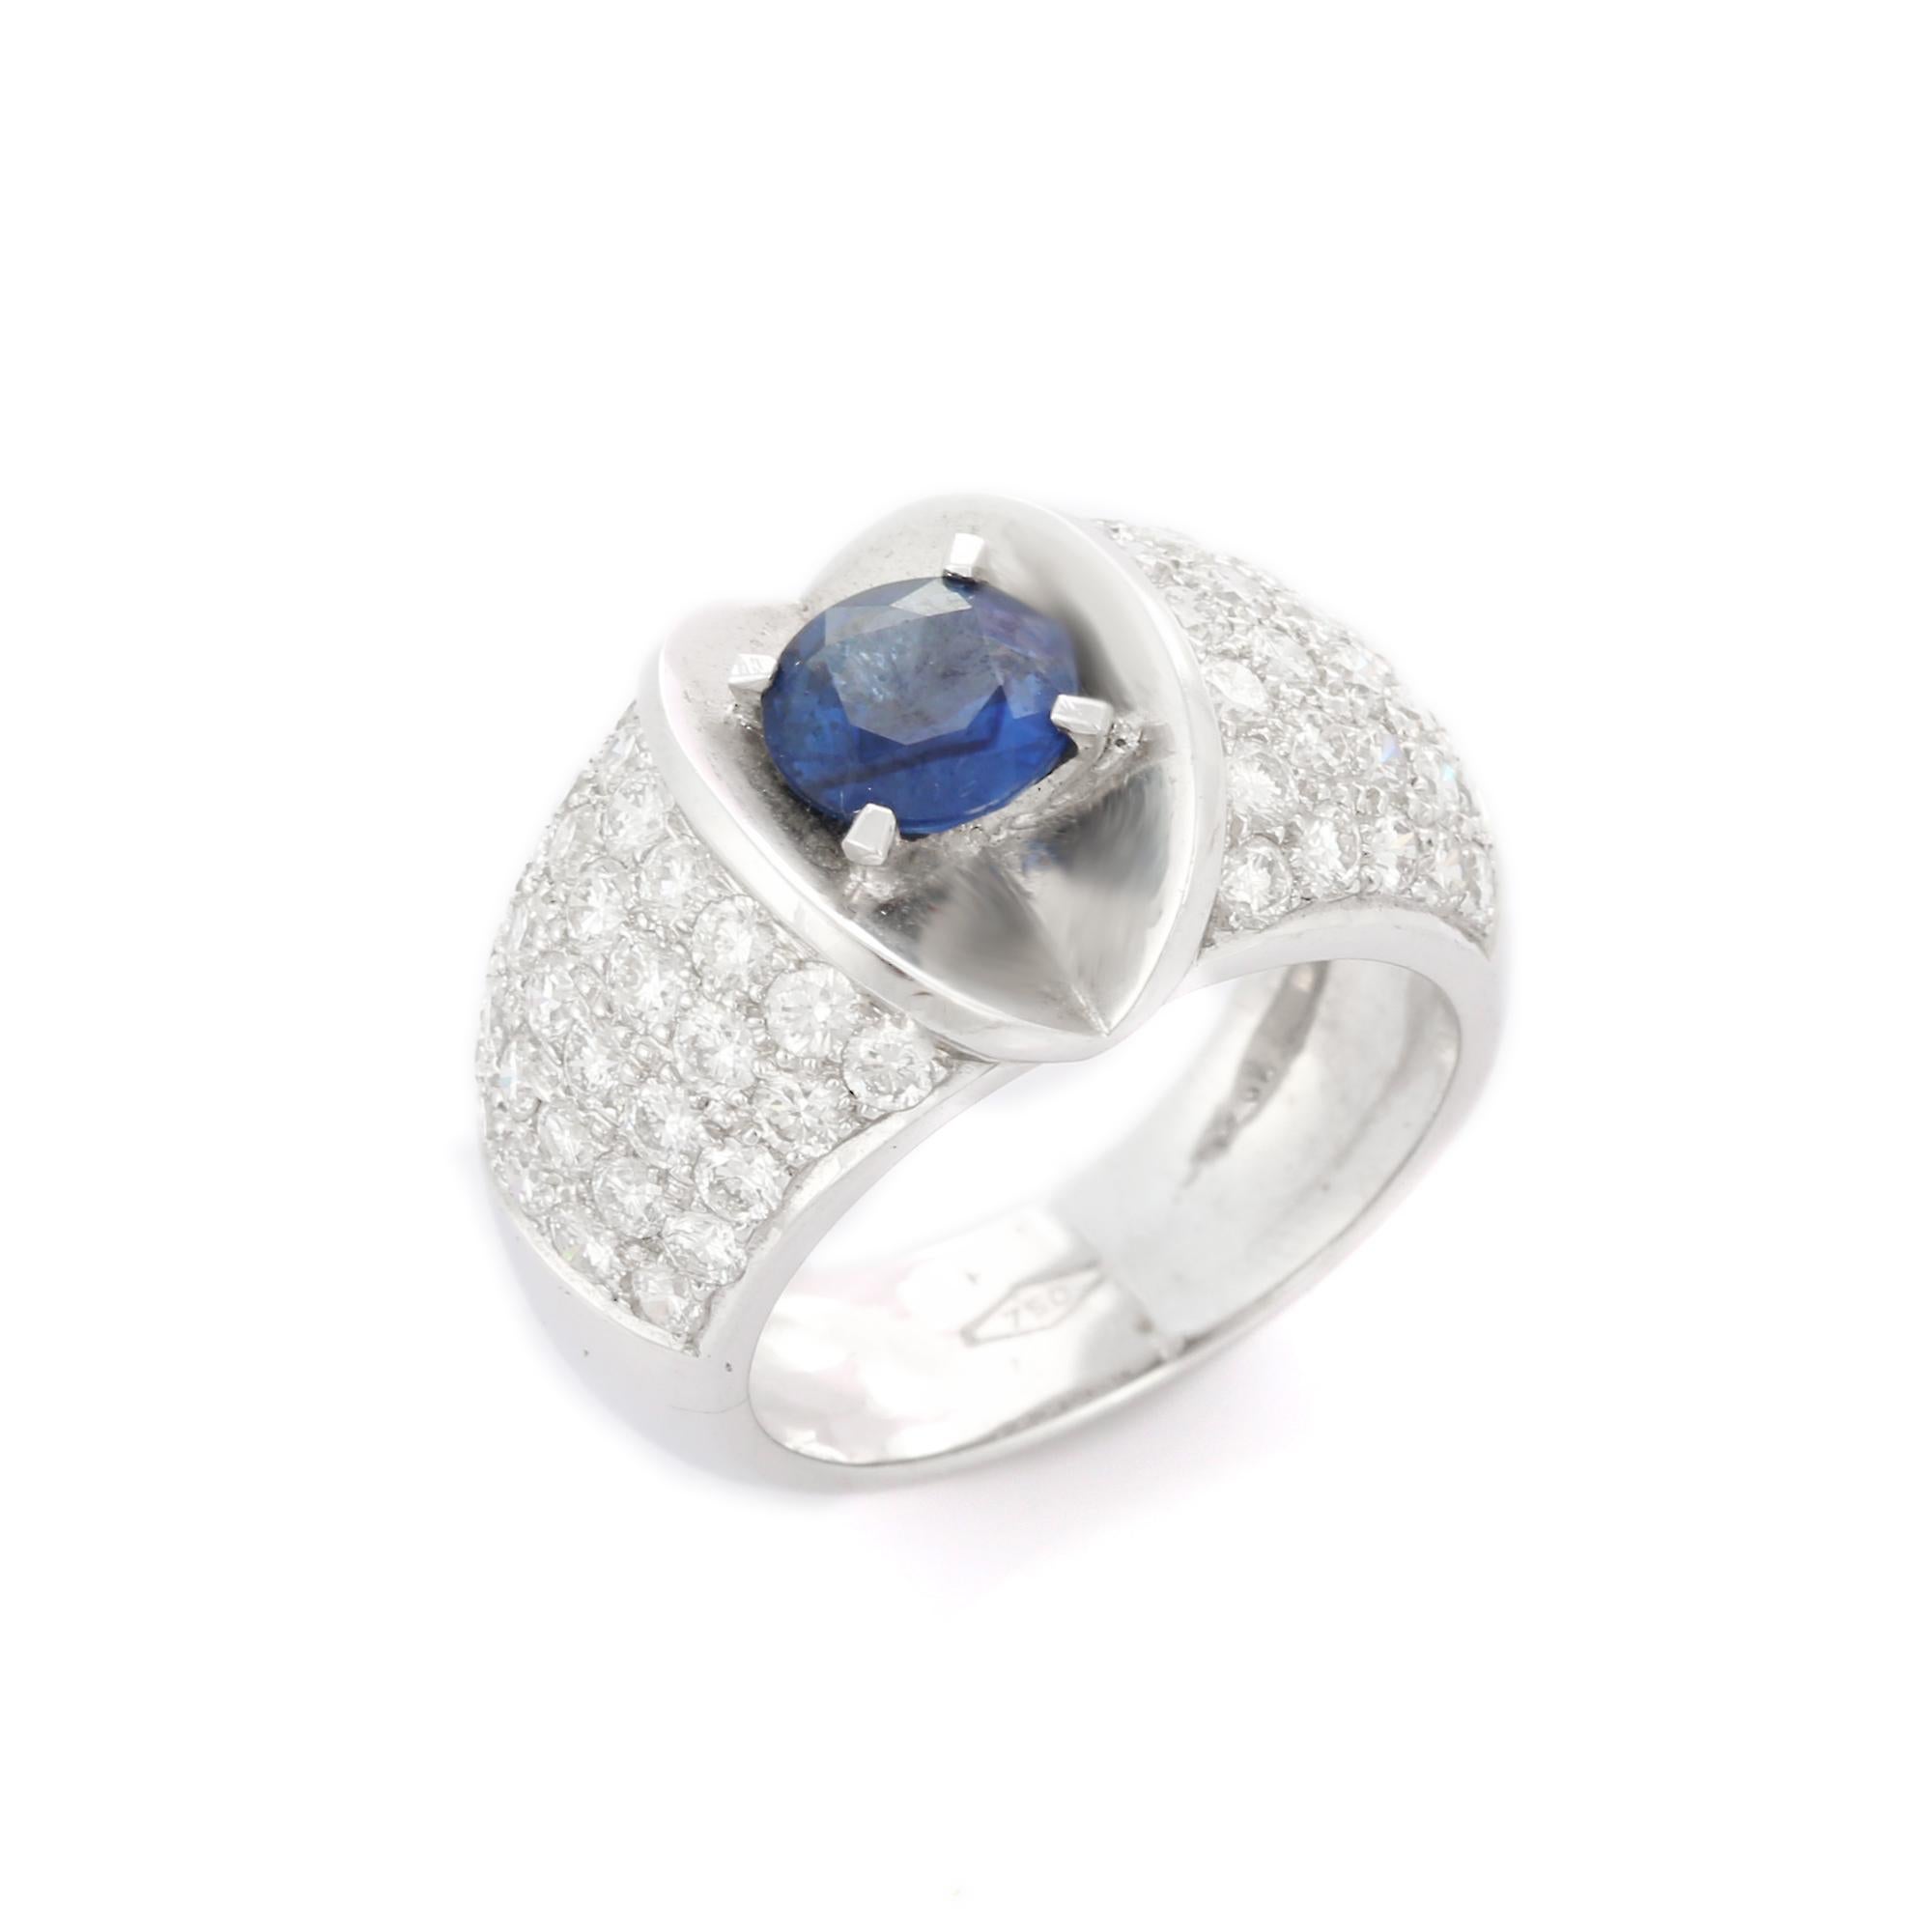 For Sale:  Sapphire and Diamond Designer Bold Ring in 18K White Gold, Wedding Cocktail Ring 5